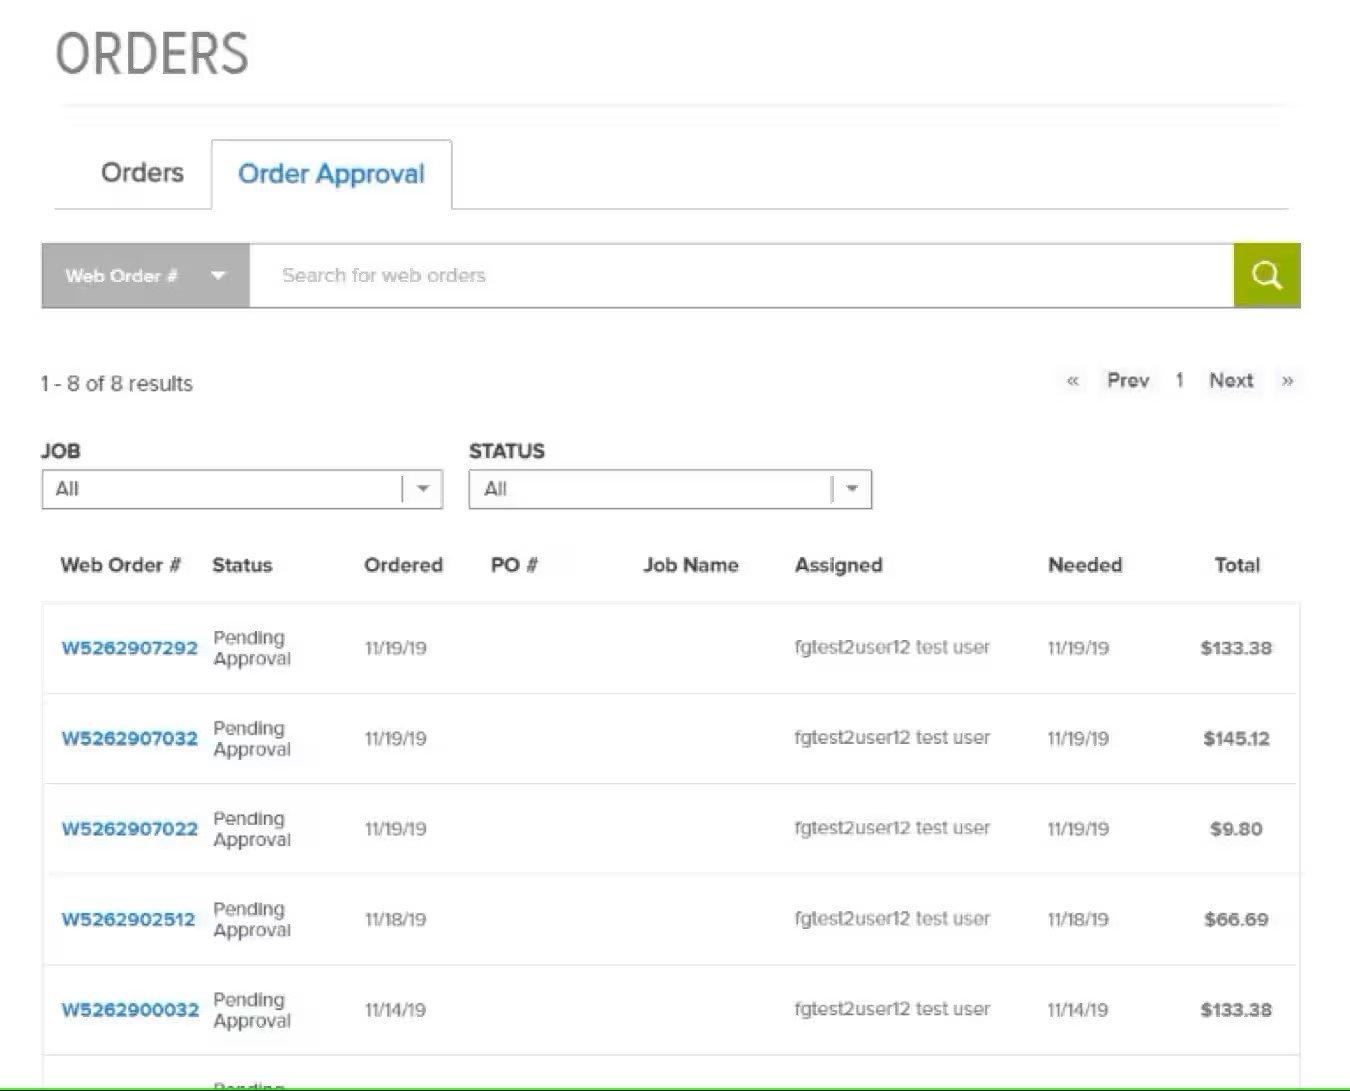 View of Order Approval tab on Orders screen, showing details of jobs pending approval.